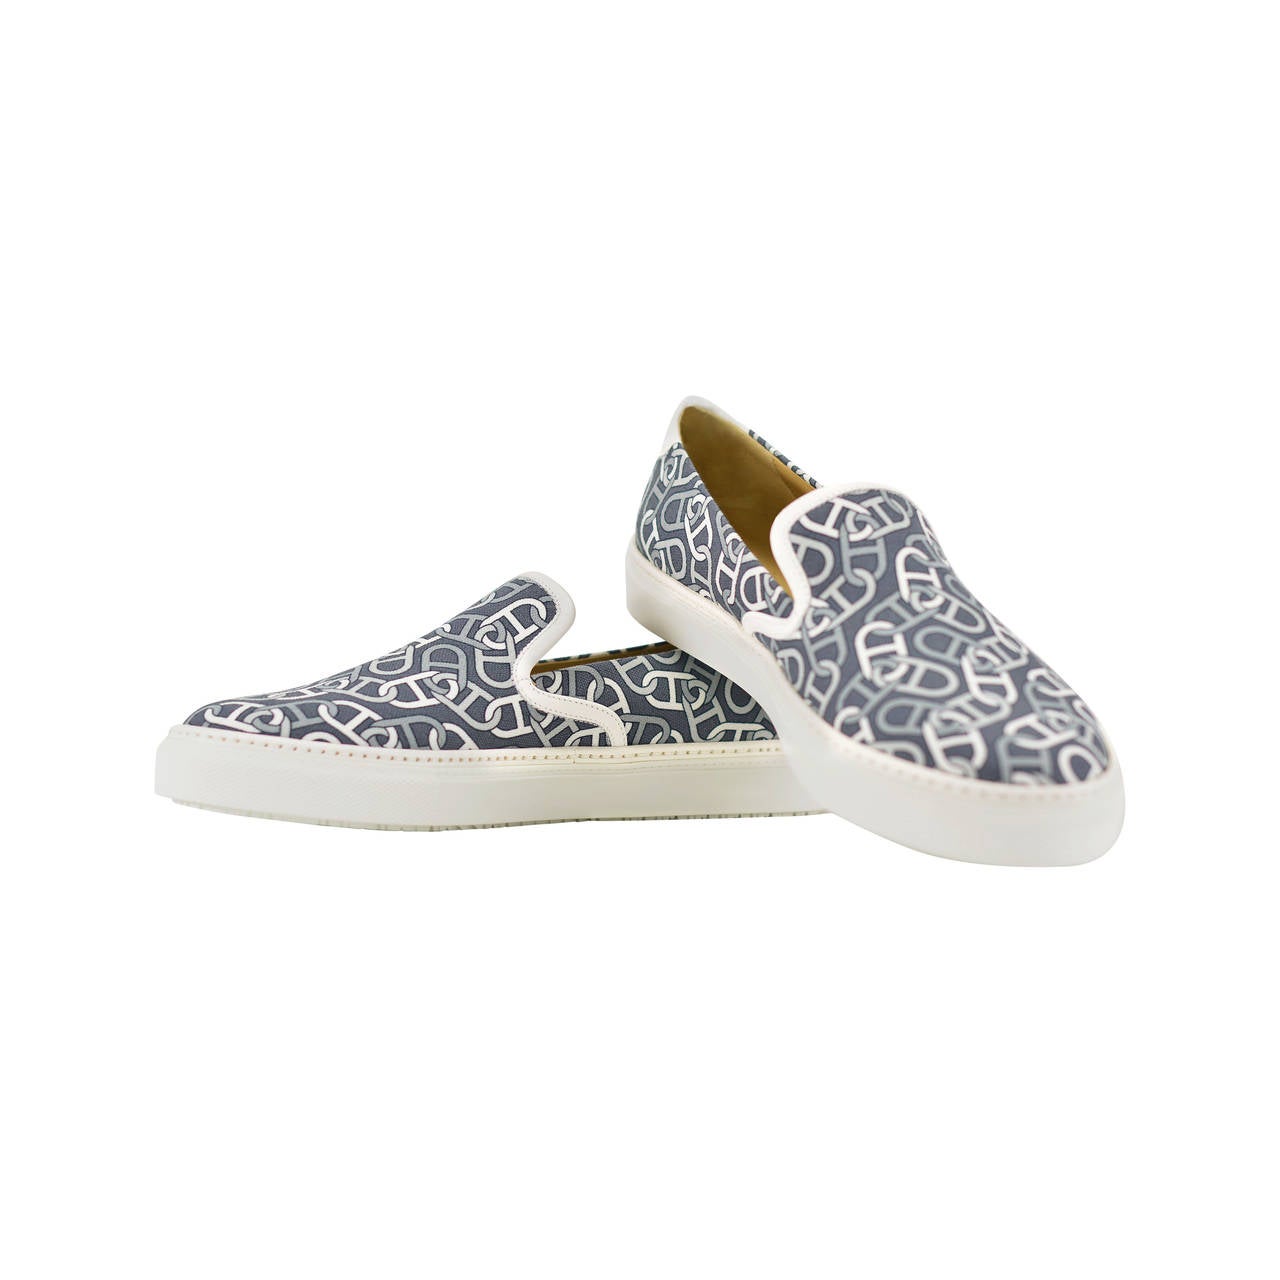 HERMES MOCCASIN KICK TOILE COTTON 41 IMPRIMEE ENTRENELEES/Leather 2015.